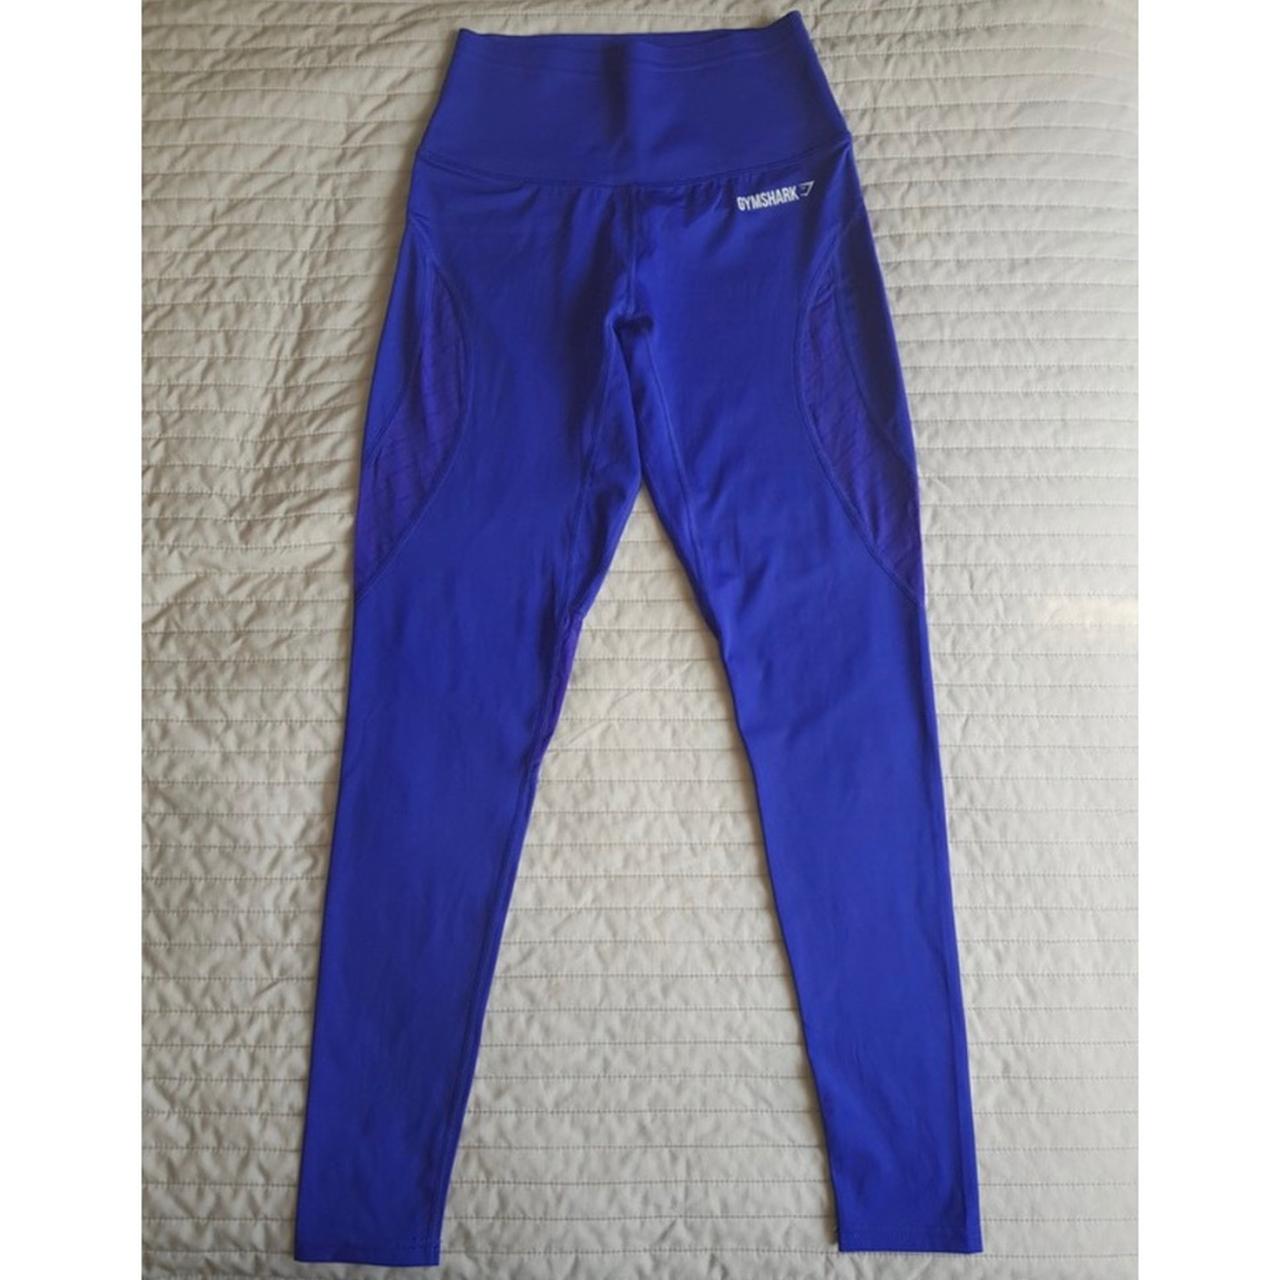 Gymshark fusion leggings size small brand new with - Depop